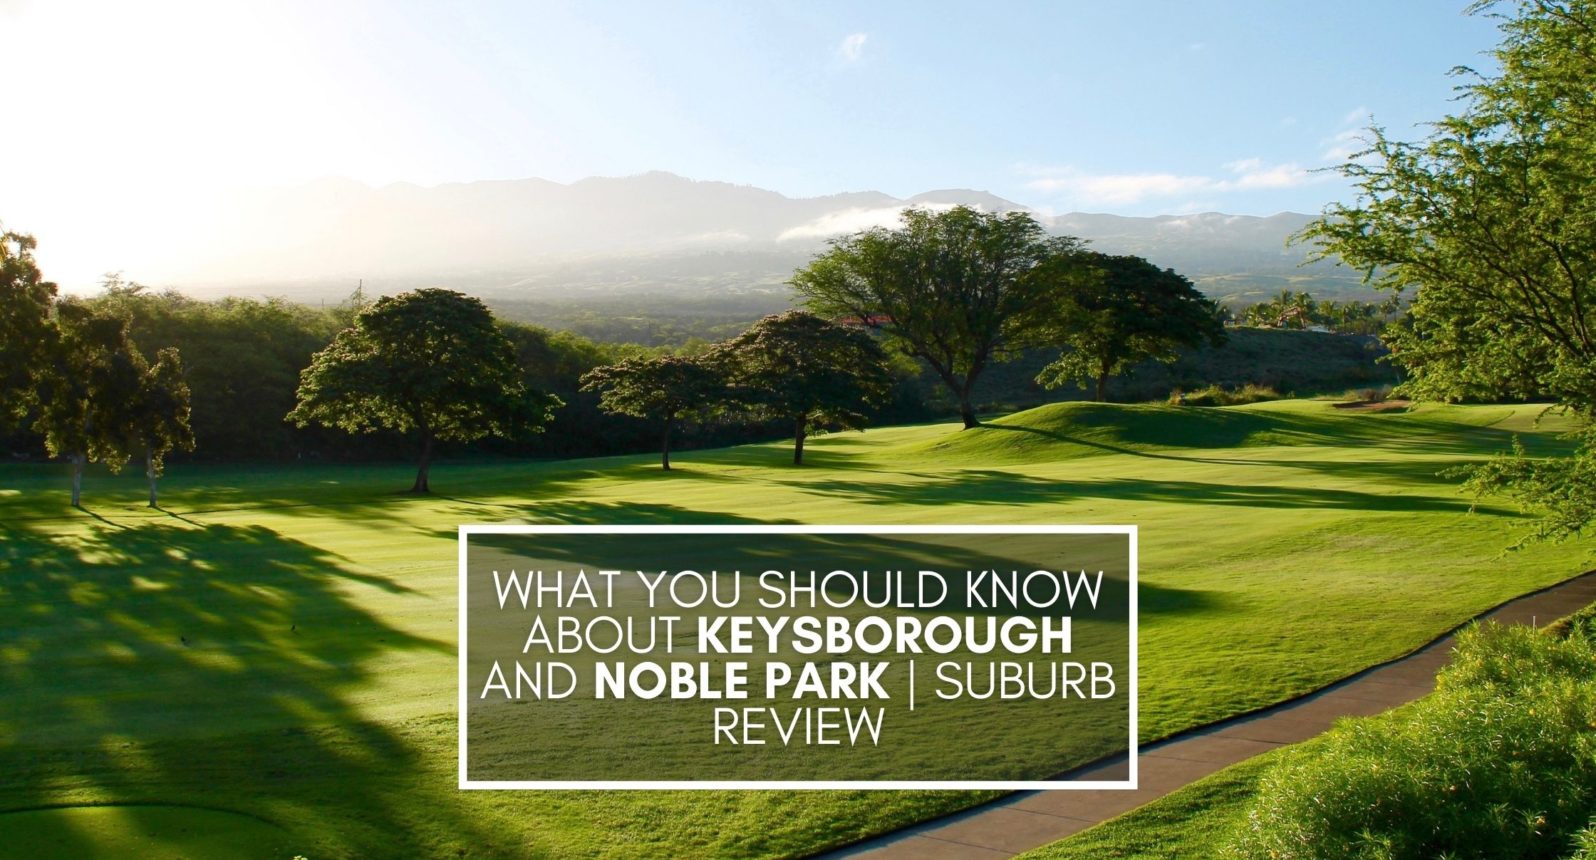 What you should know about keysborough and noble park suburb review